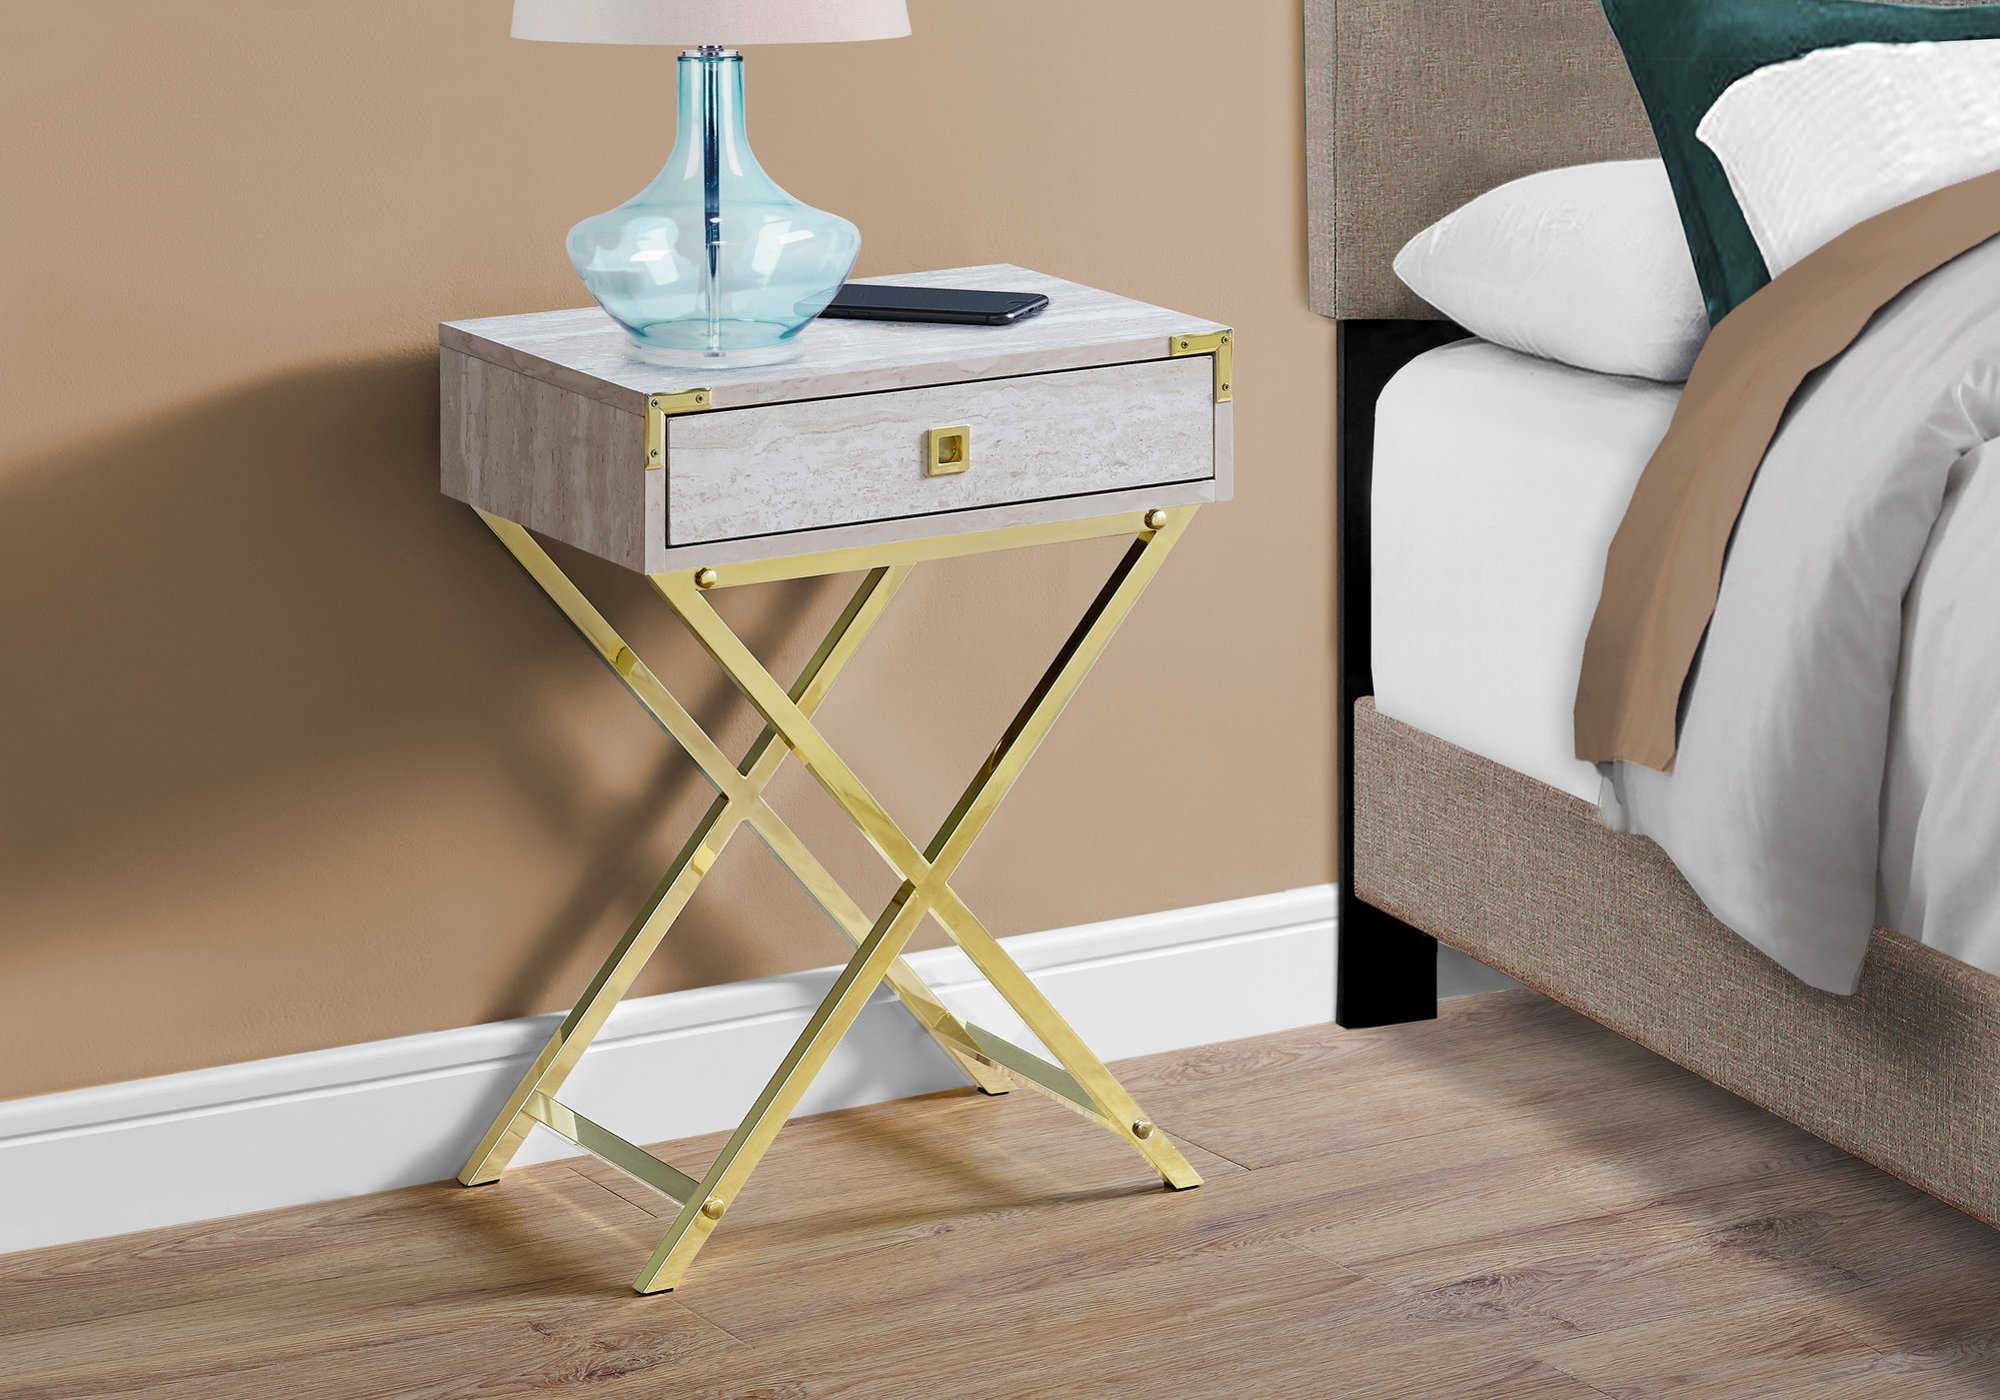 NIGHT STAND - 24"H / BEIGE MARBLE / GOLD METAL